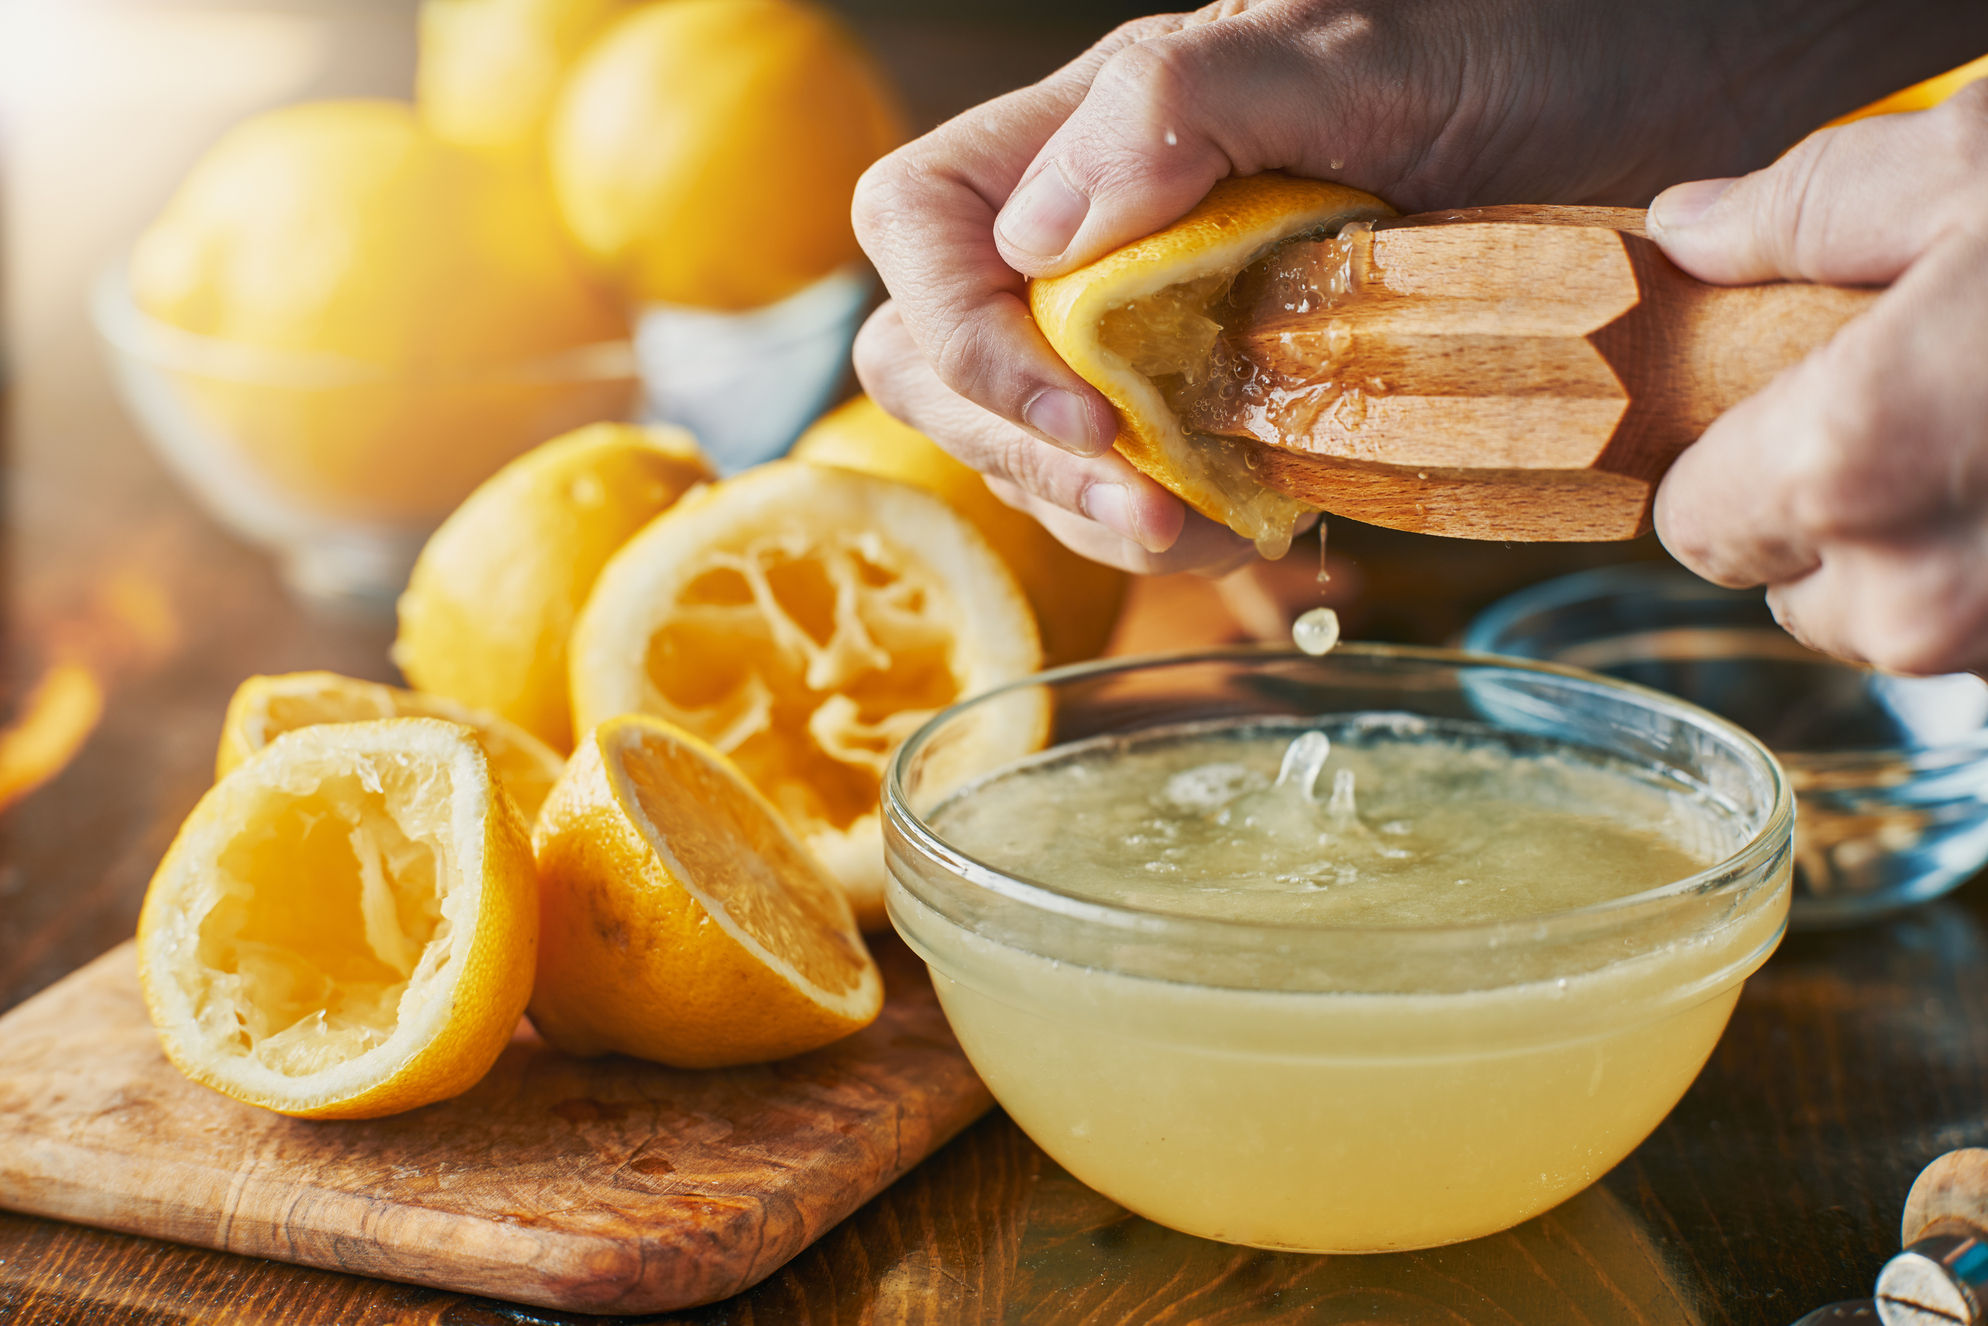 The Real Benefits of Lemon for Skin That You Haven't Heard Before